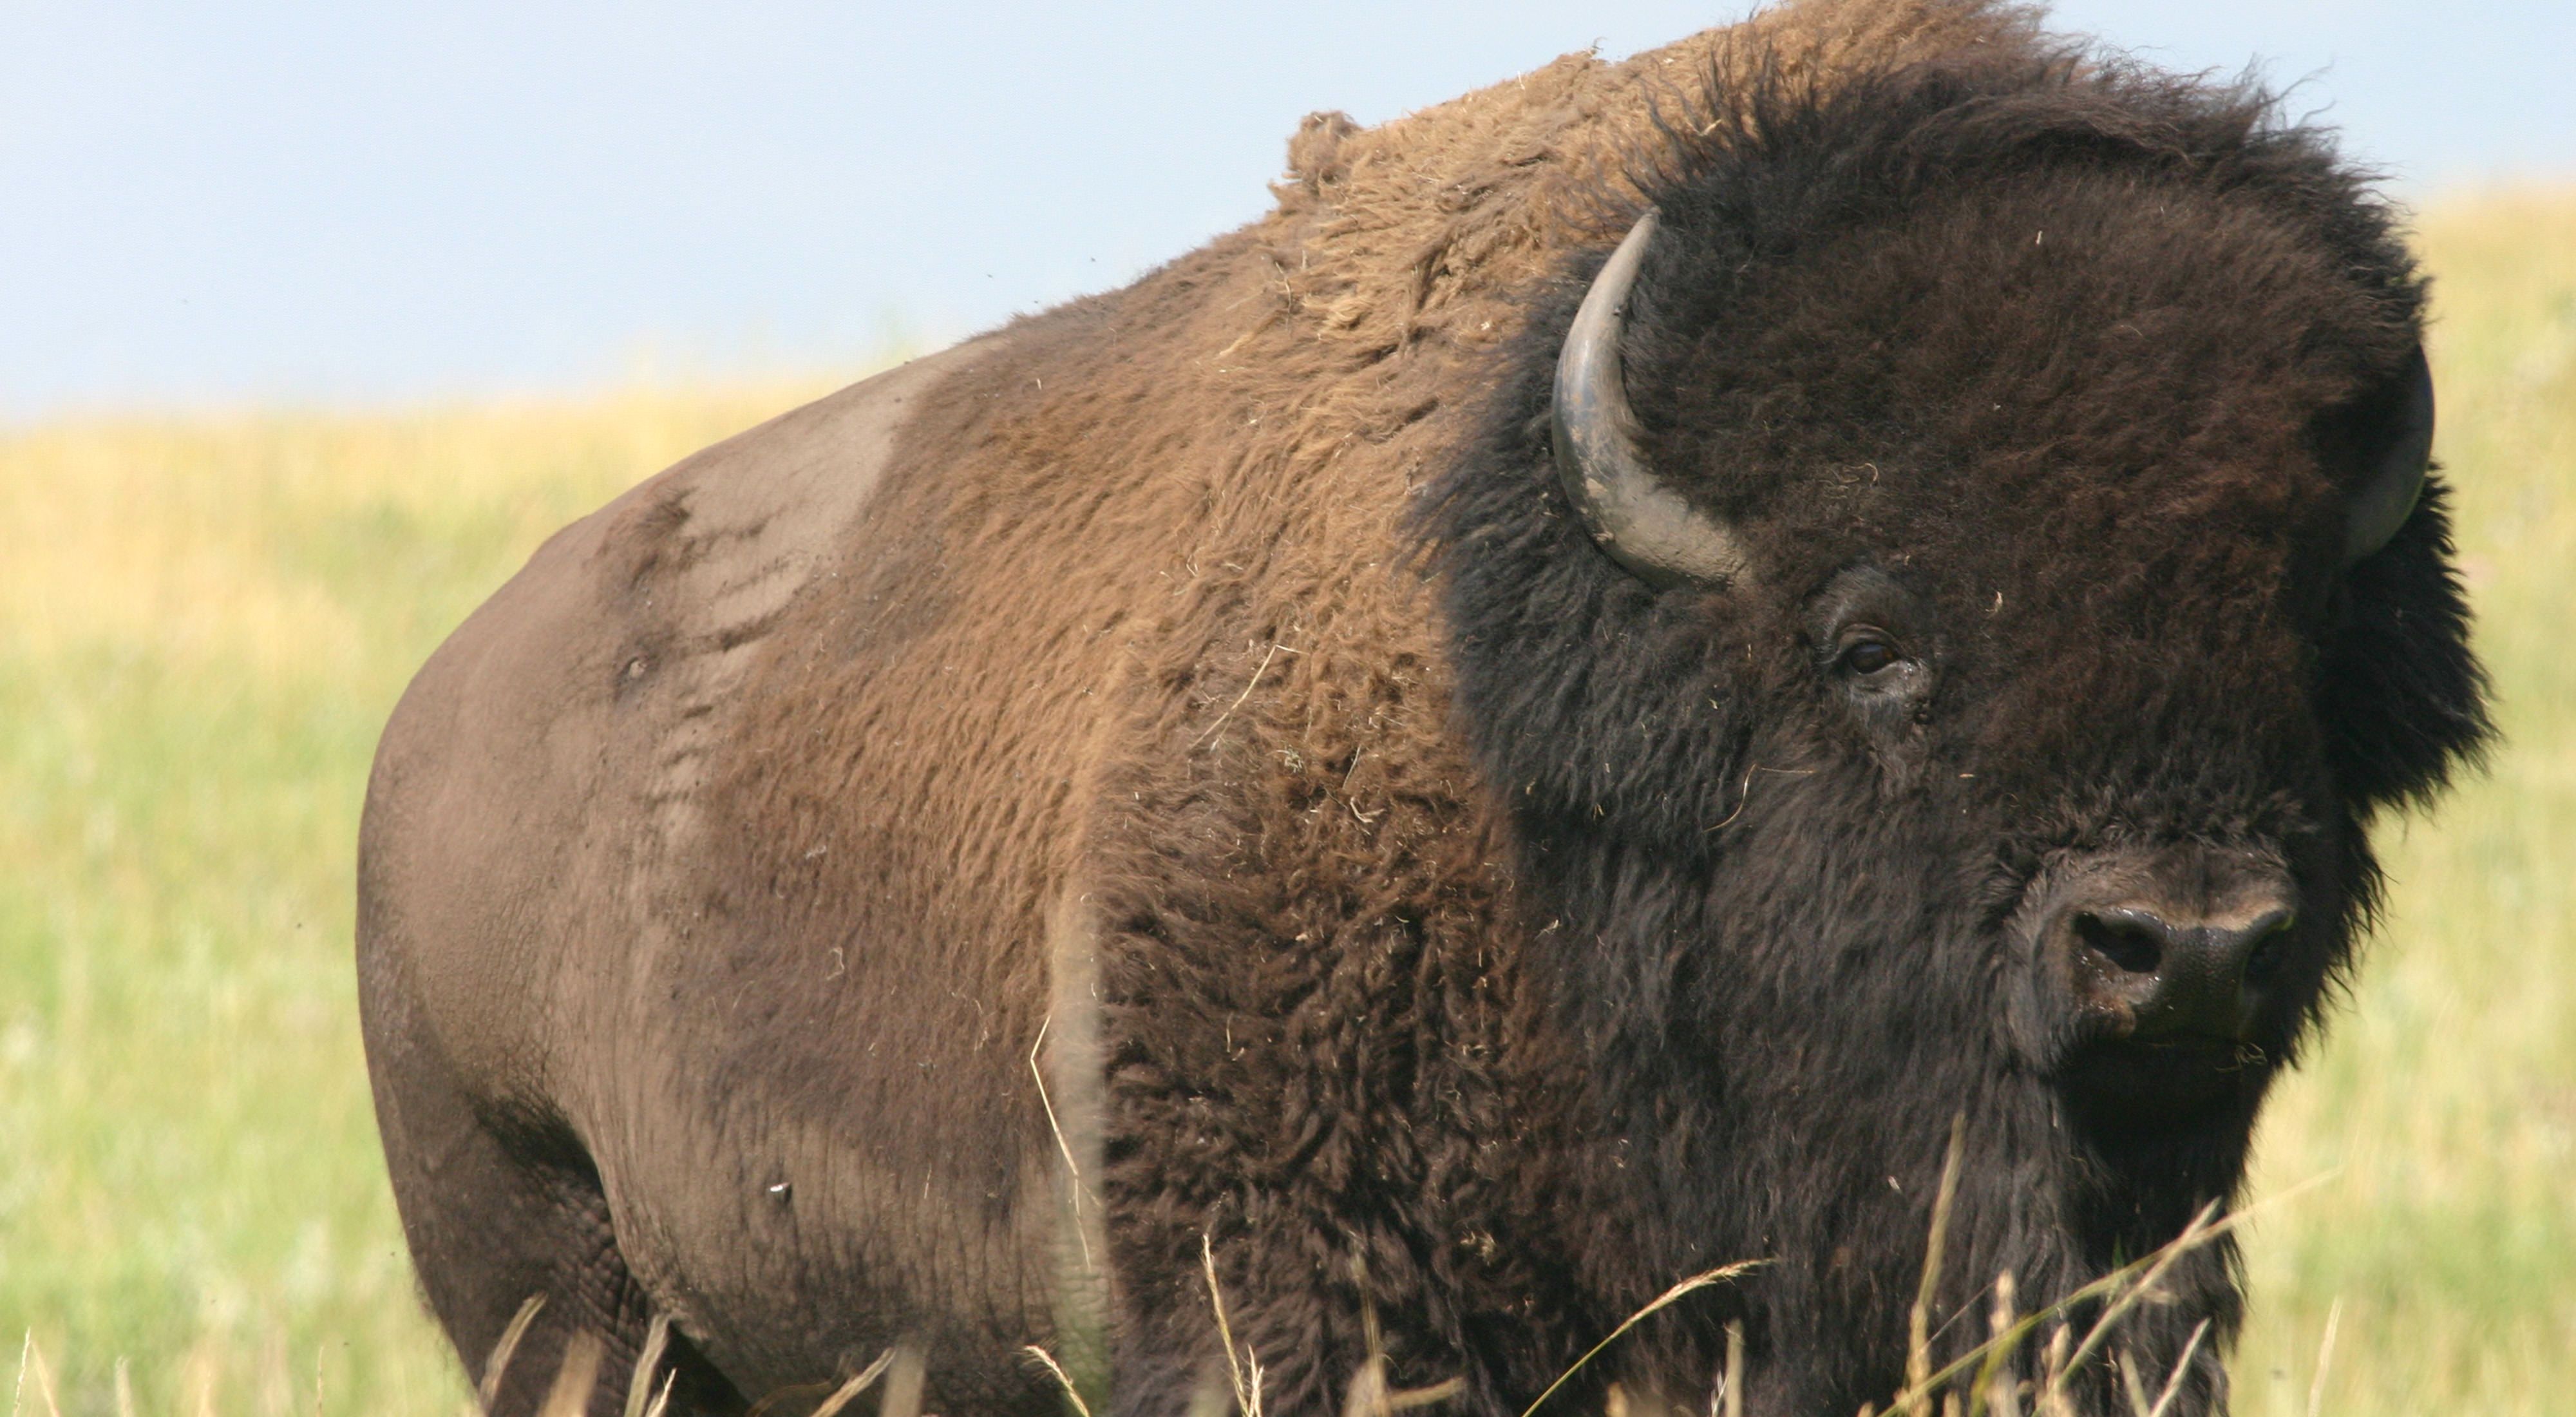 A bison bull looking at the camera.